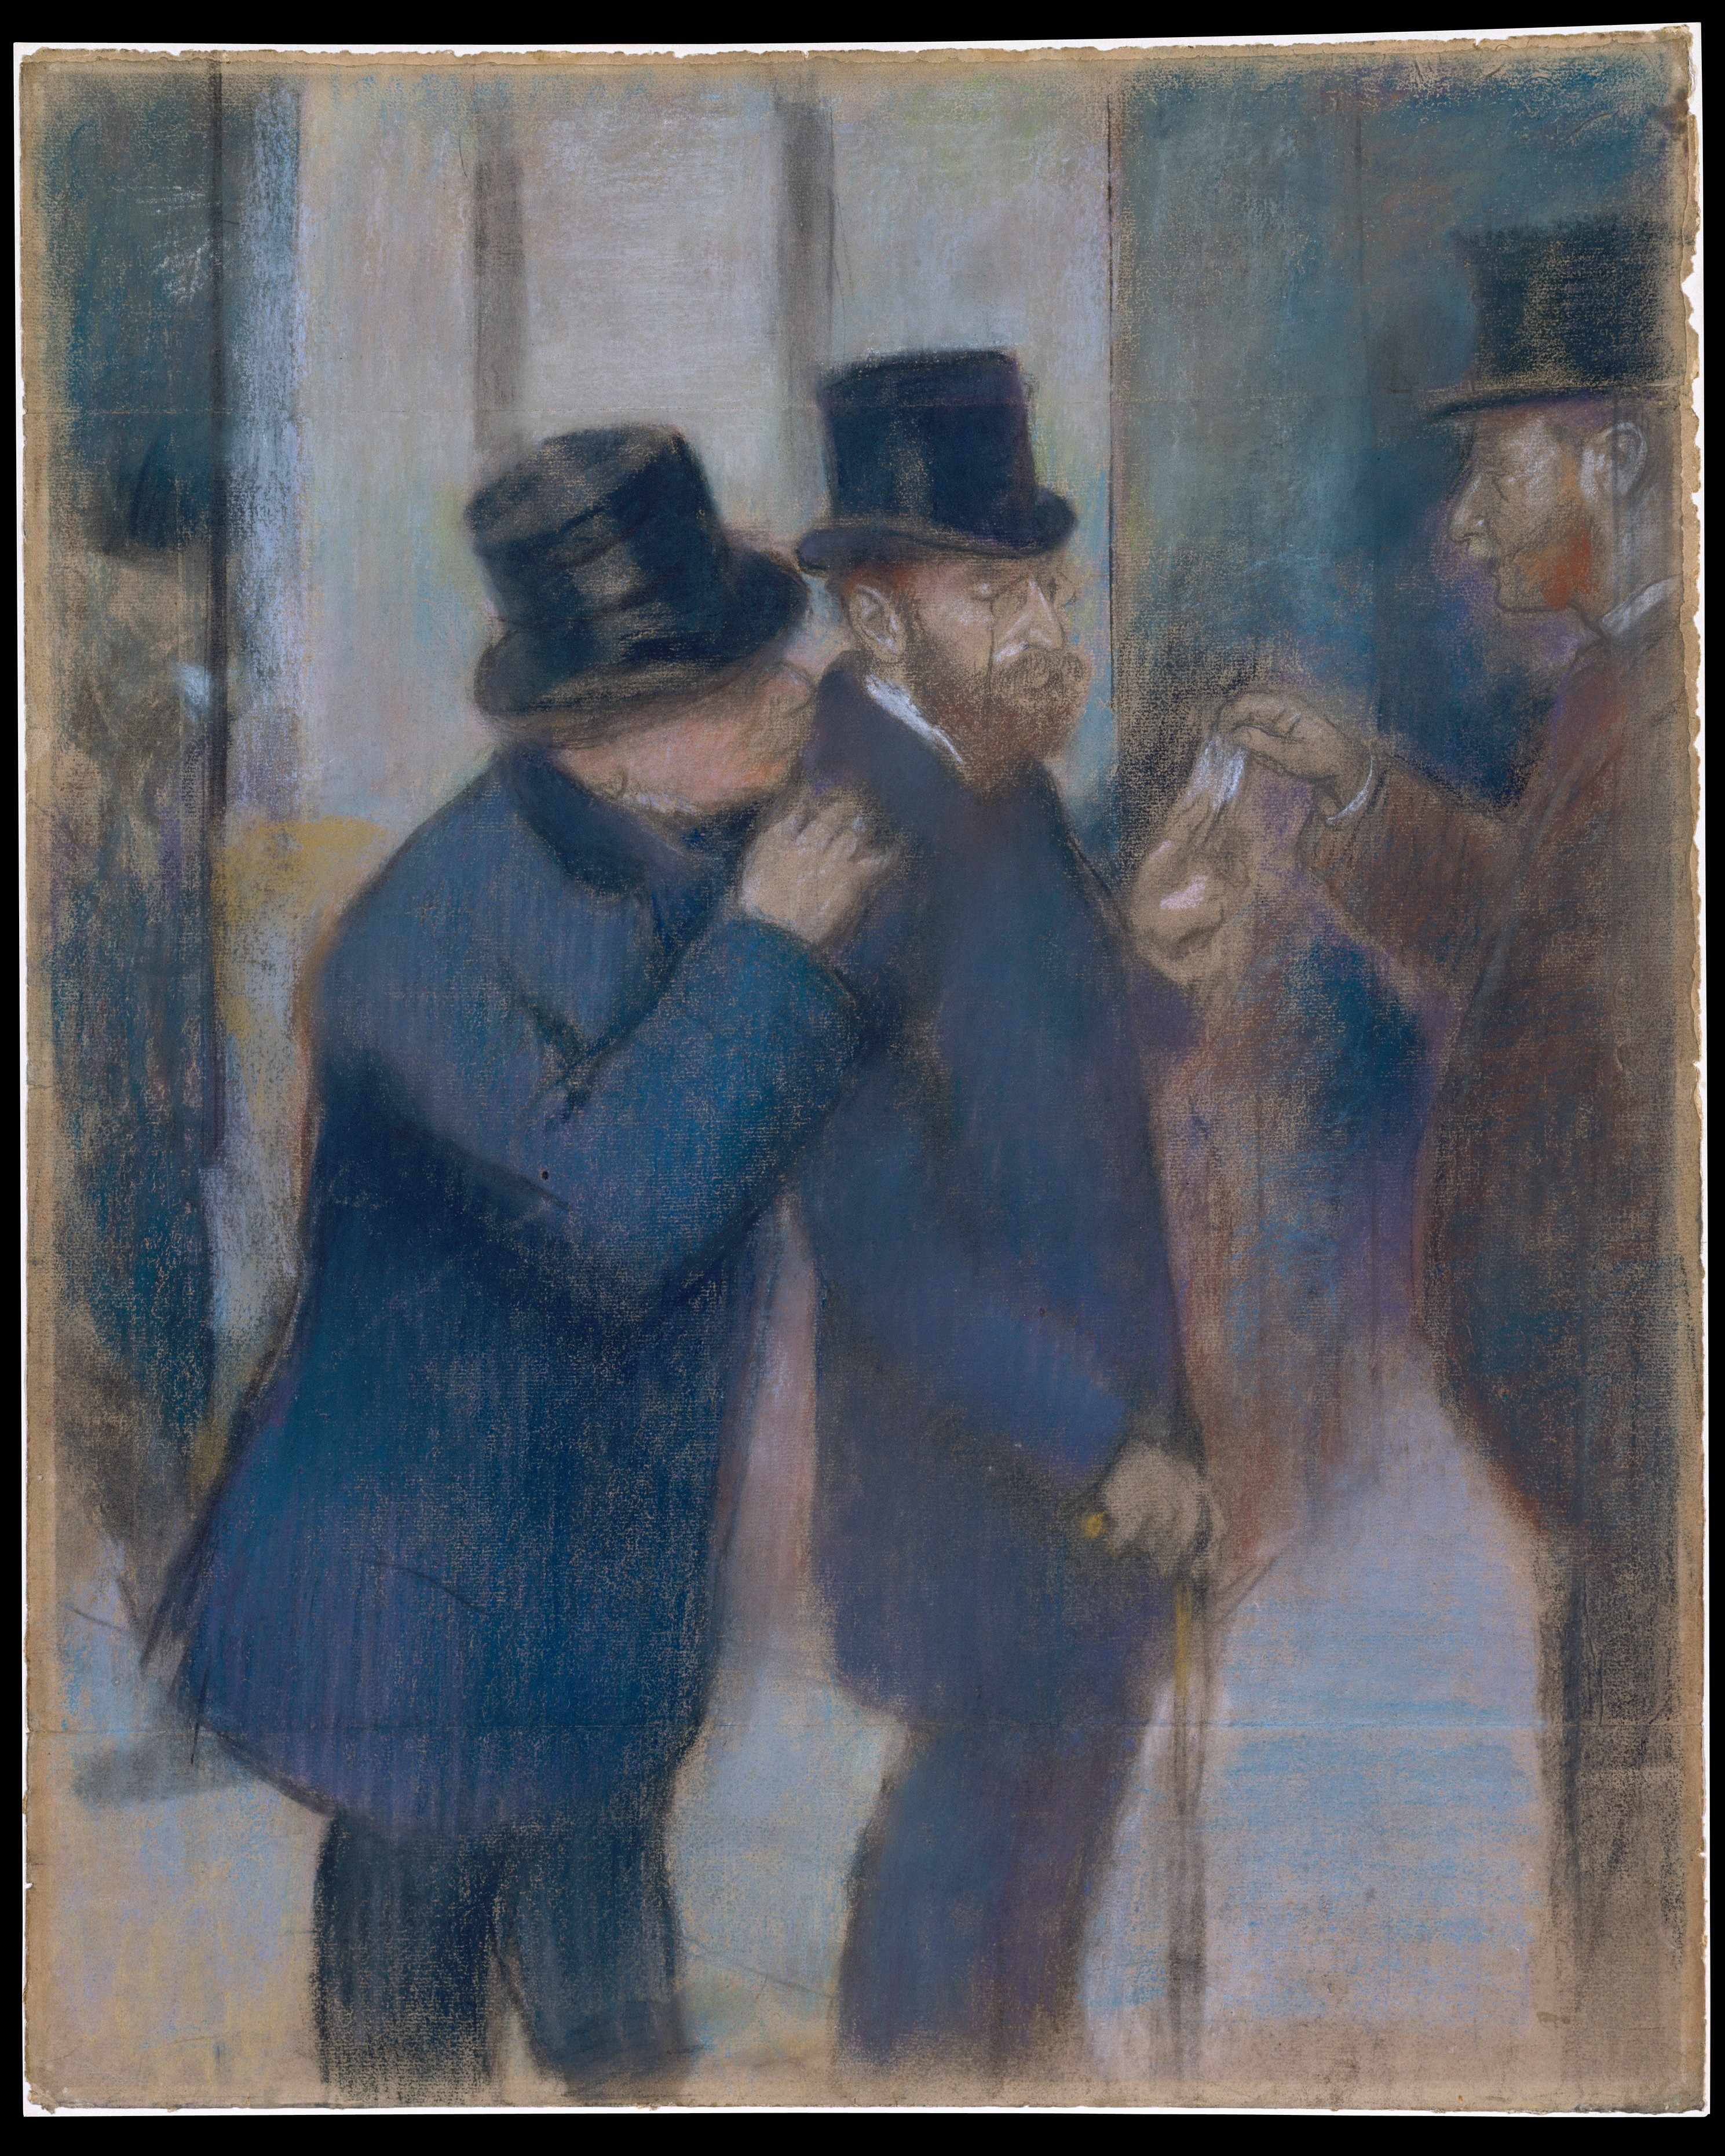 Fig. 2. Edgar Degas, Portraits at the Stock Exchange, ca. 1878-79. Pastel on paper, pieced and laid down on canvas, 28 3/8 × 22 7/8 in. (72 × 58 cm). Metropolitan Museum of Art, New York. Photo: Metropolitan Museum of Art